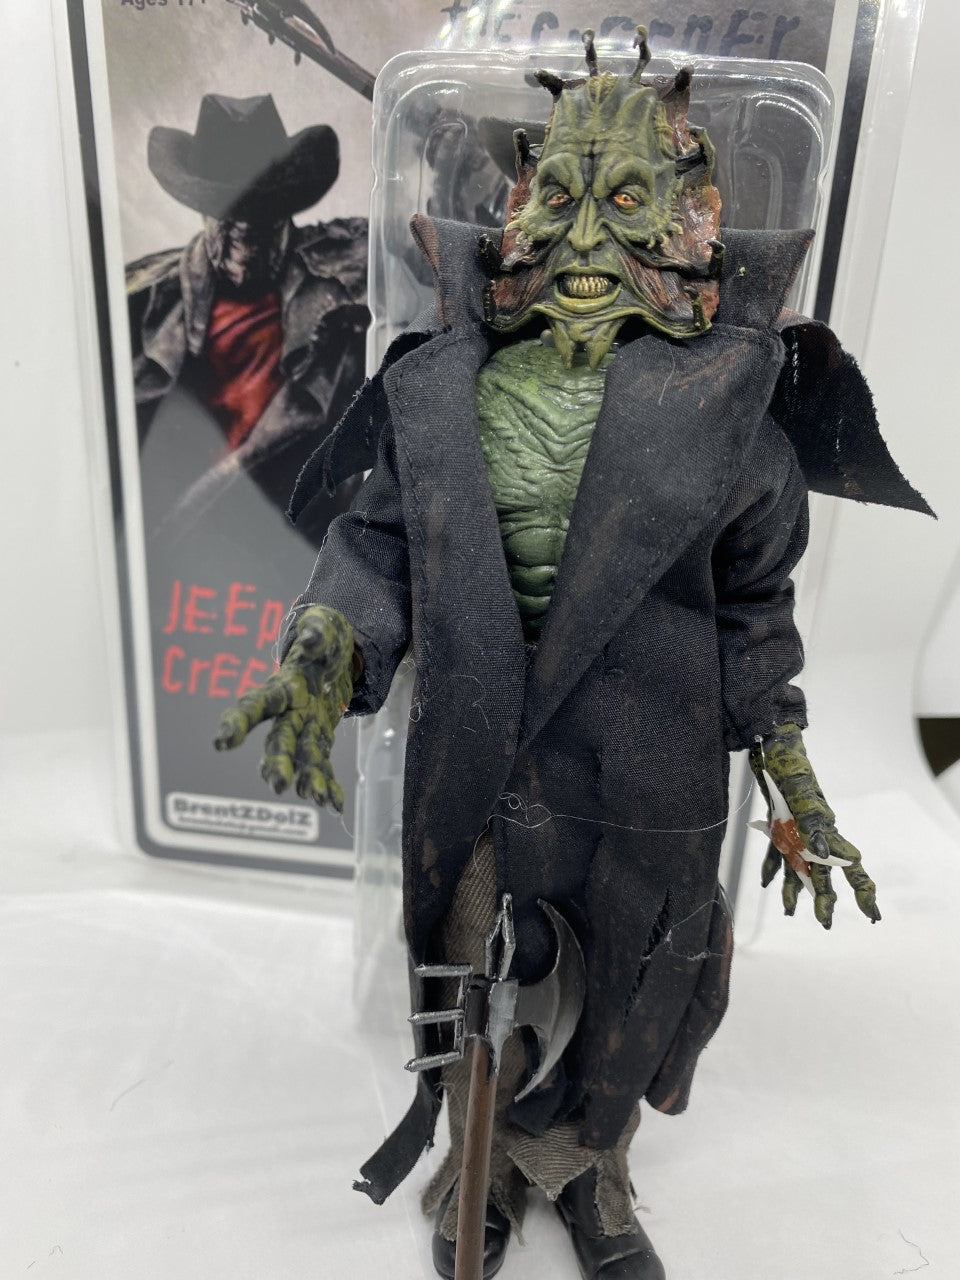 Brentz Dolz Jeepers Creepers - The Creeper (Claws Out) 8" Action Figure